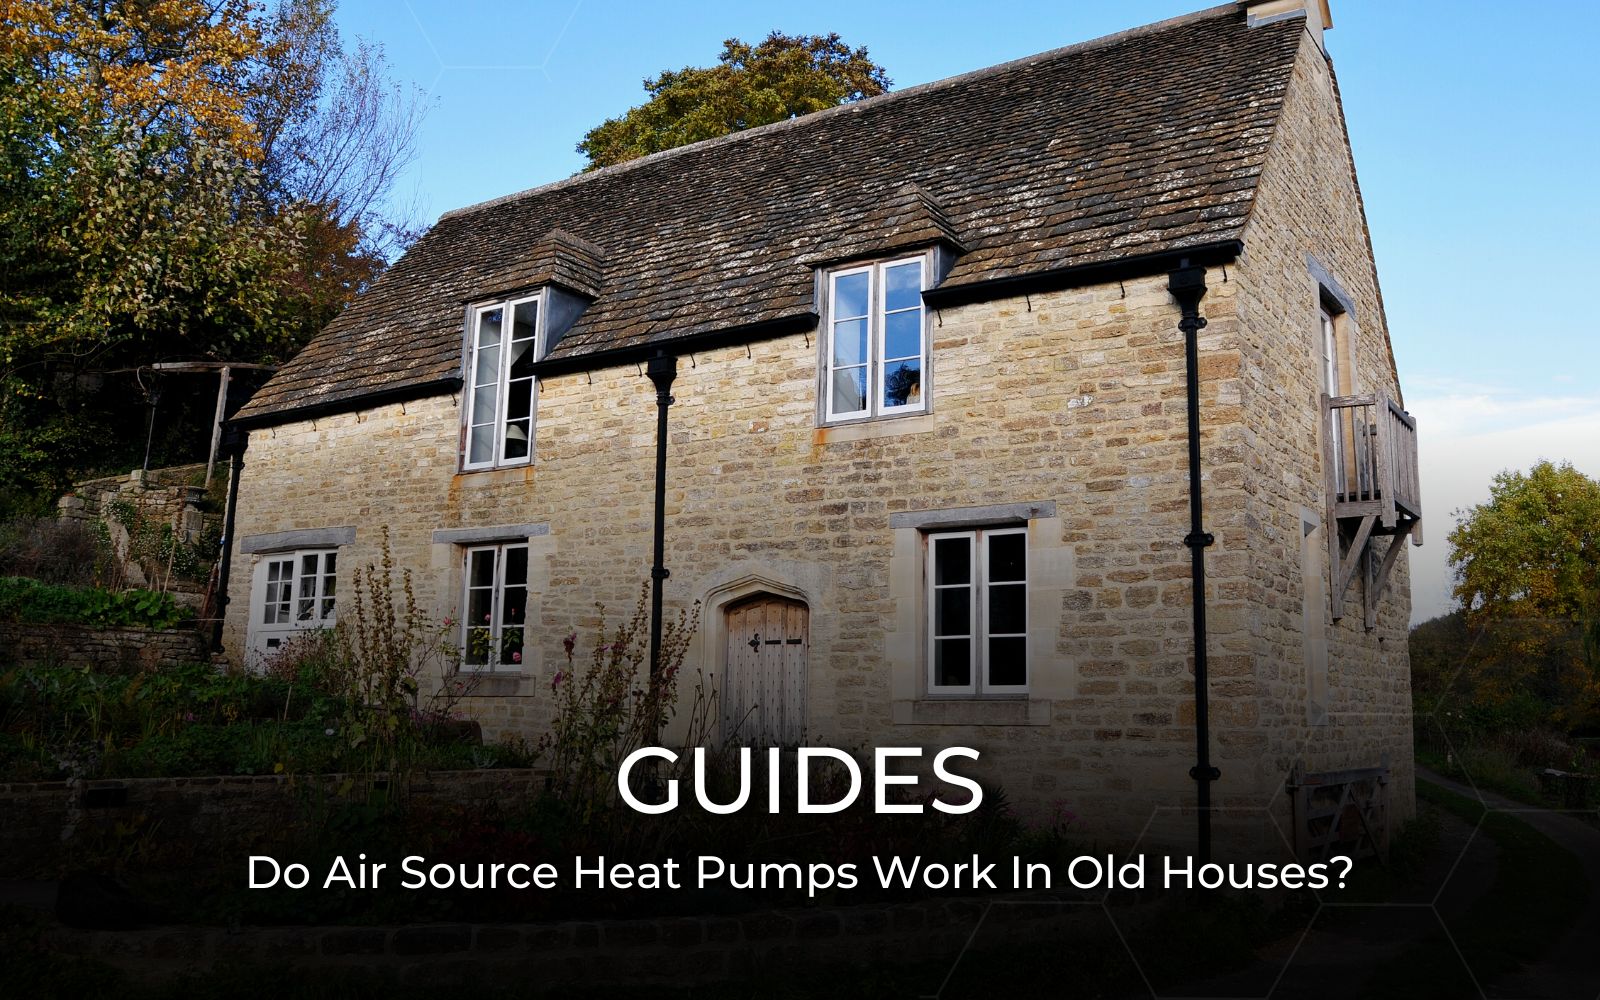 Do air source heat pumps work in old houses